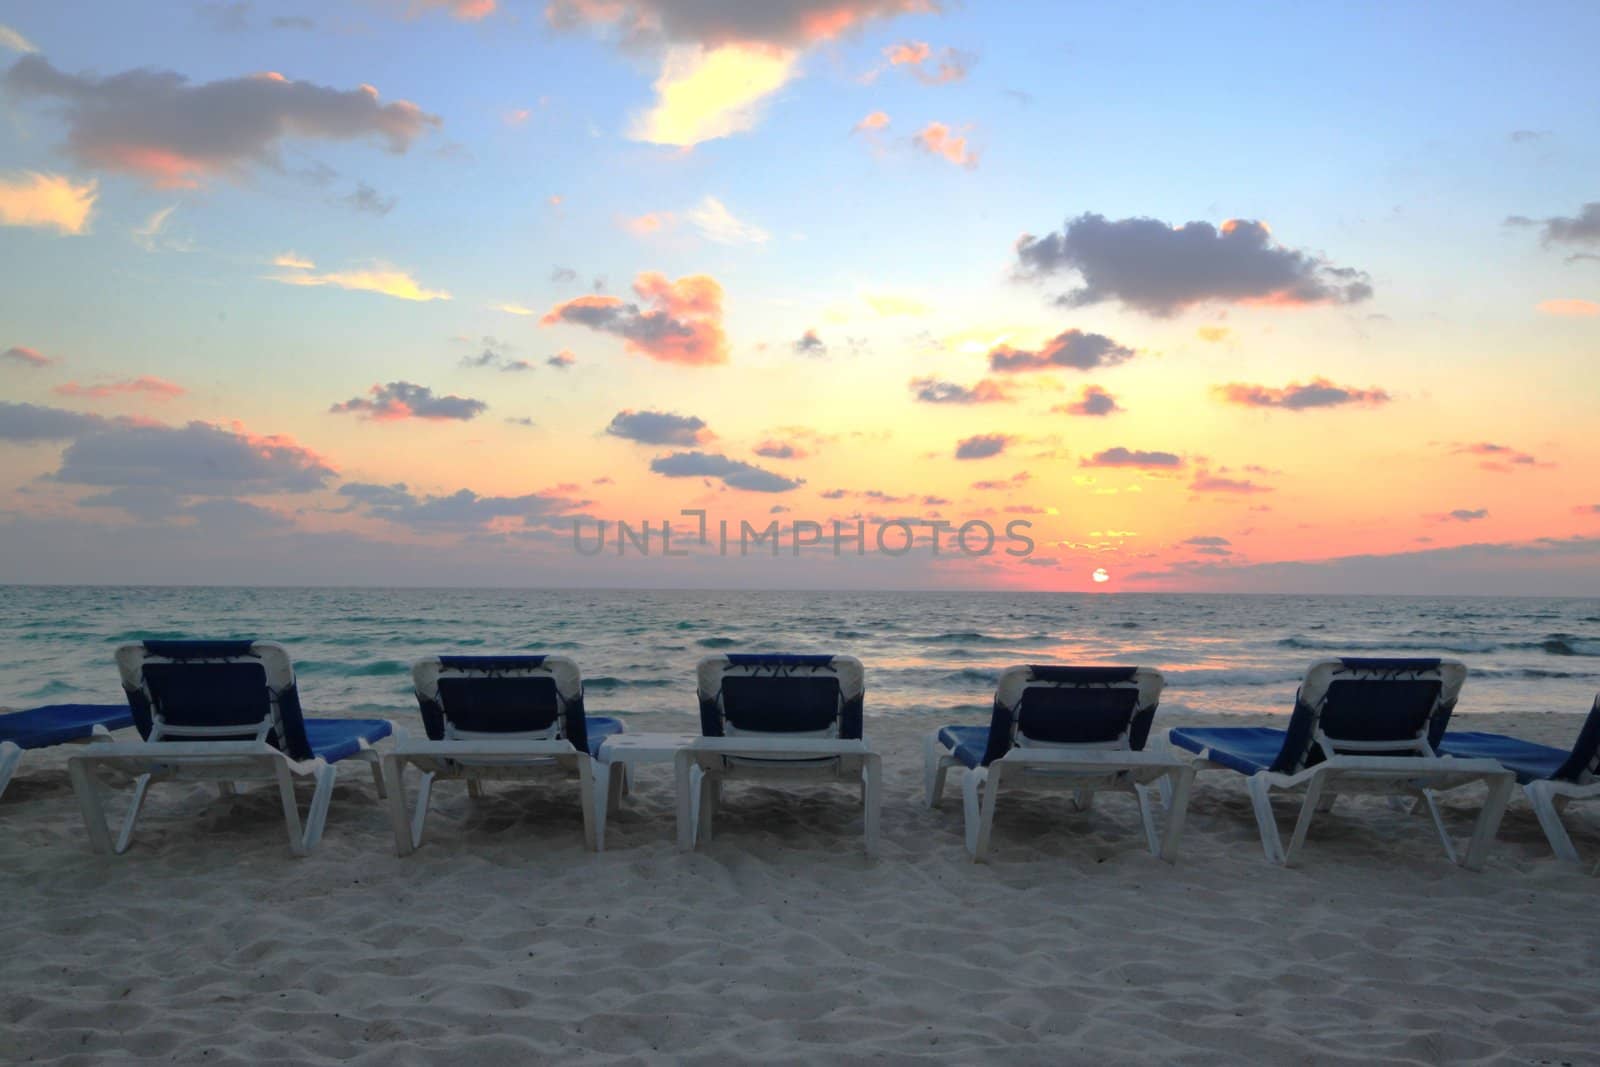 Sun rising over Mexican beach with lounge chairs.